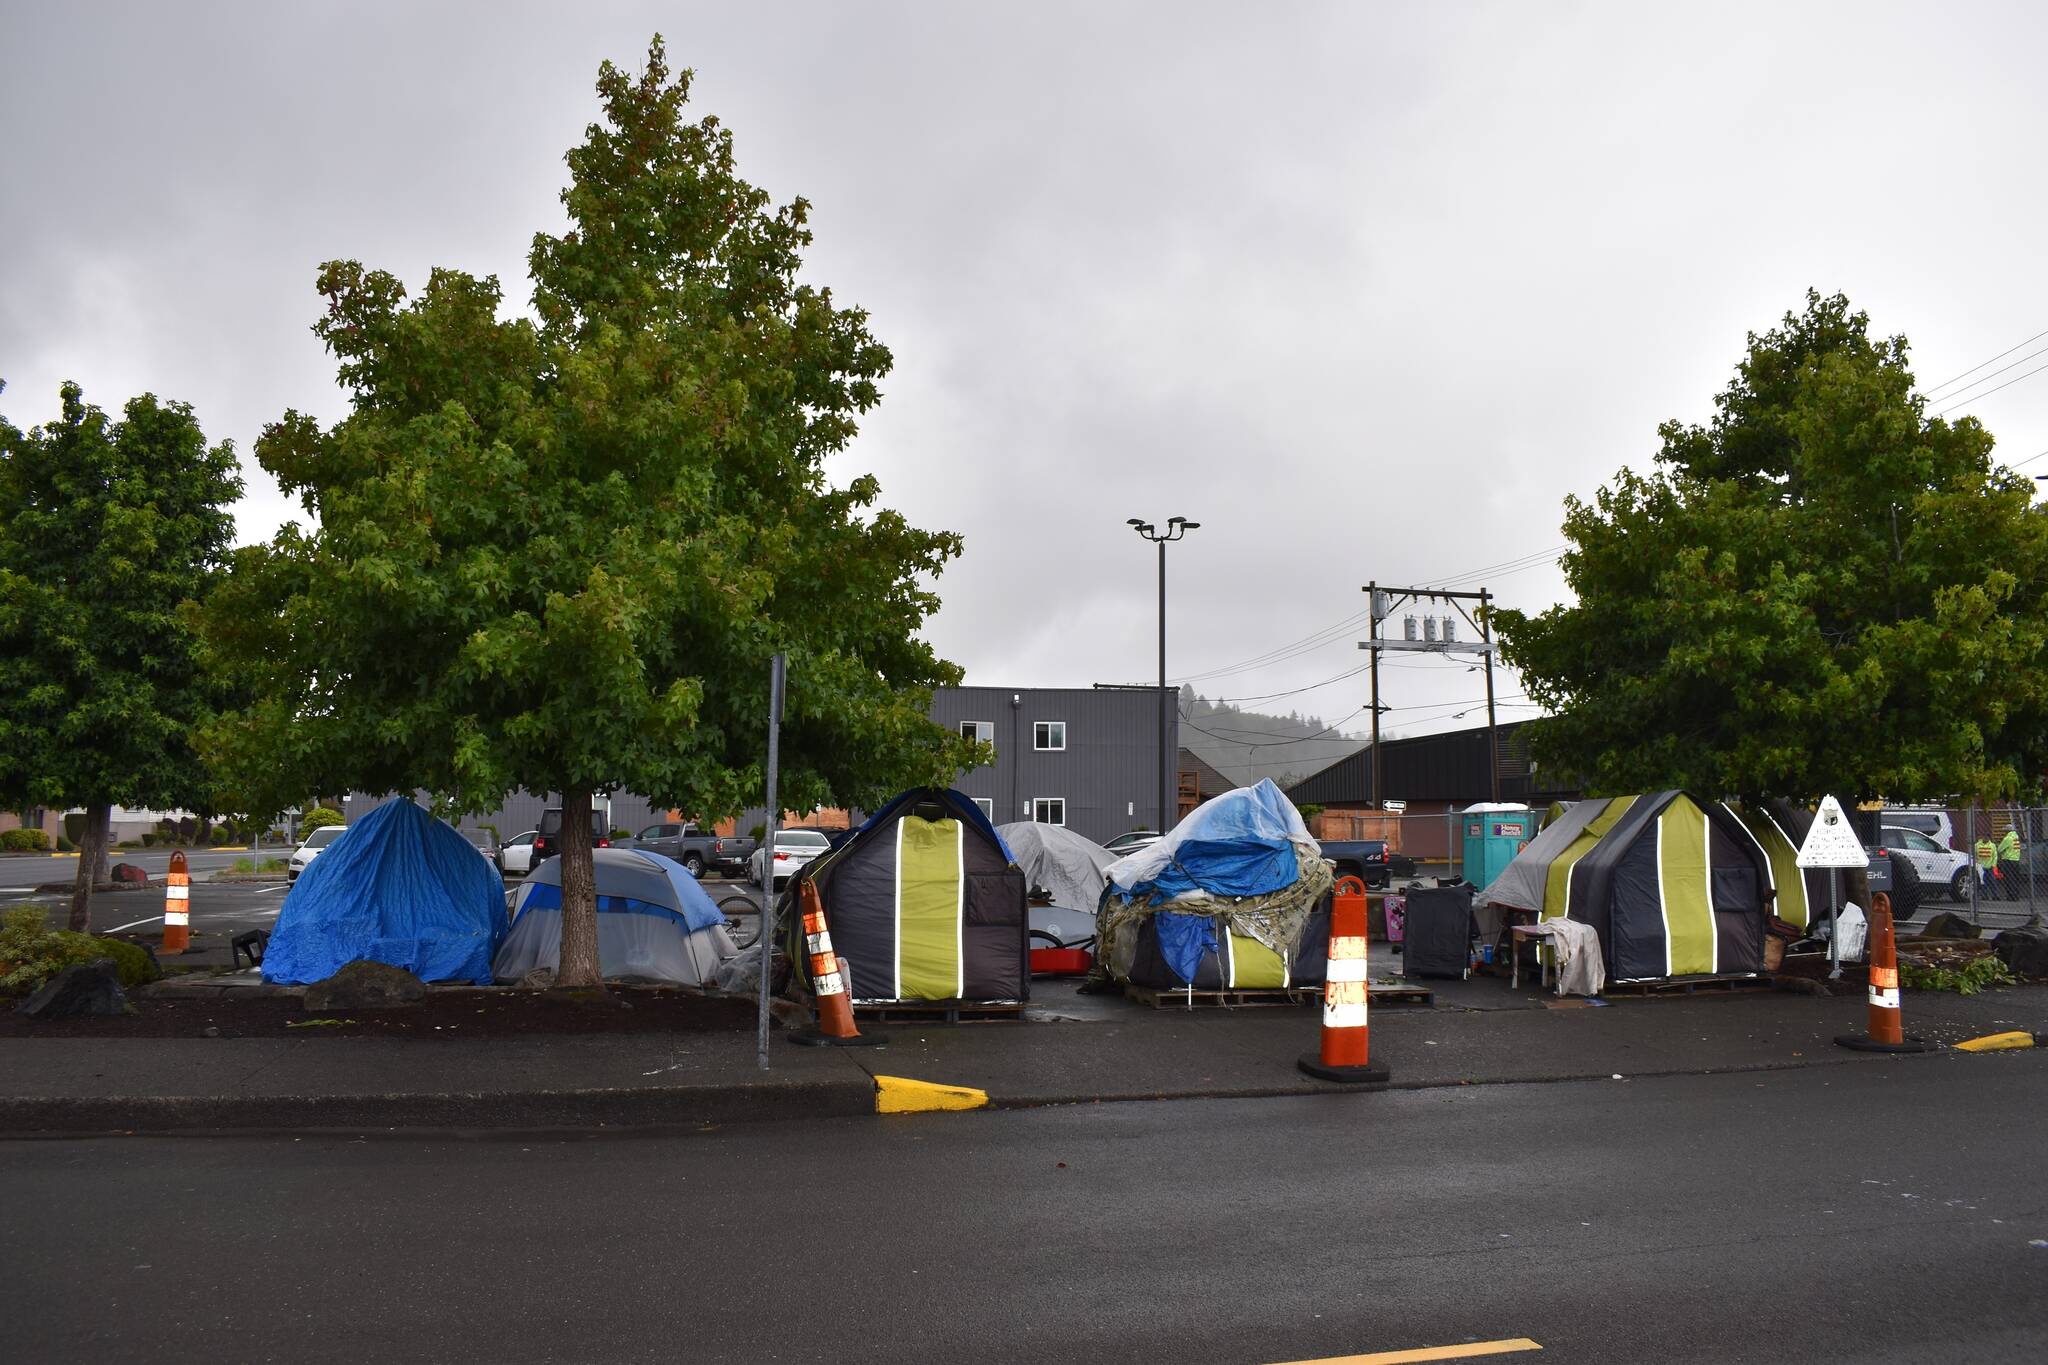 DAN HAMMOCK | THE DAILY WORLD The officially-closed TASL homeless tent camp in a parking lot at Aberdeen City Hall has grown to hold about 20 people in the last month, and the city has little legal authority to clear it.